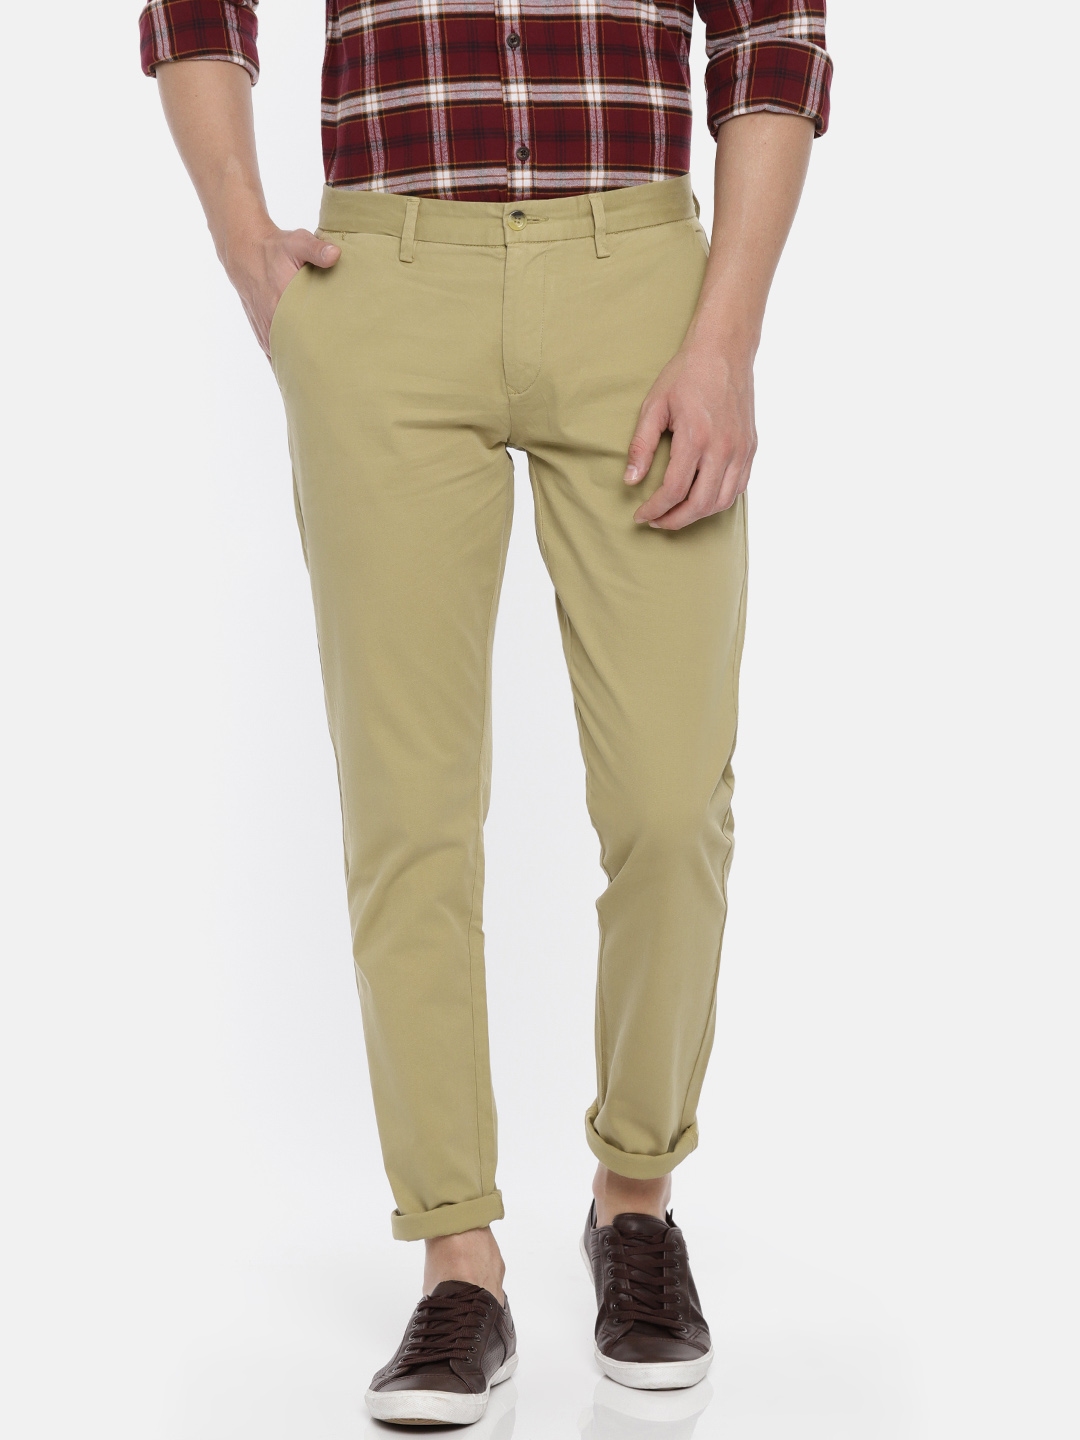 Ruggers  Cotton Blend Slim Slim Green Mens Chinos  Pack of 1   Buy  Ruggers  Cotton Blend Slim Slim Green Mens Chinos  Pack of 1  Online at  Low Price in India  Snapdeal